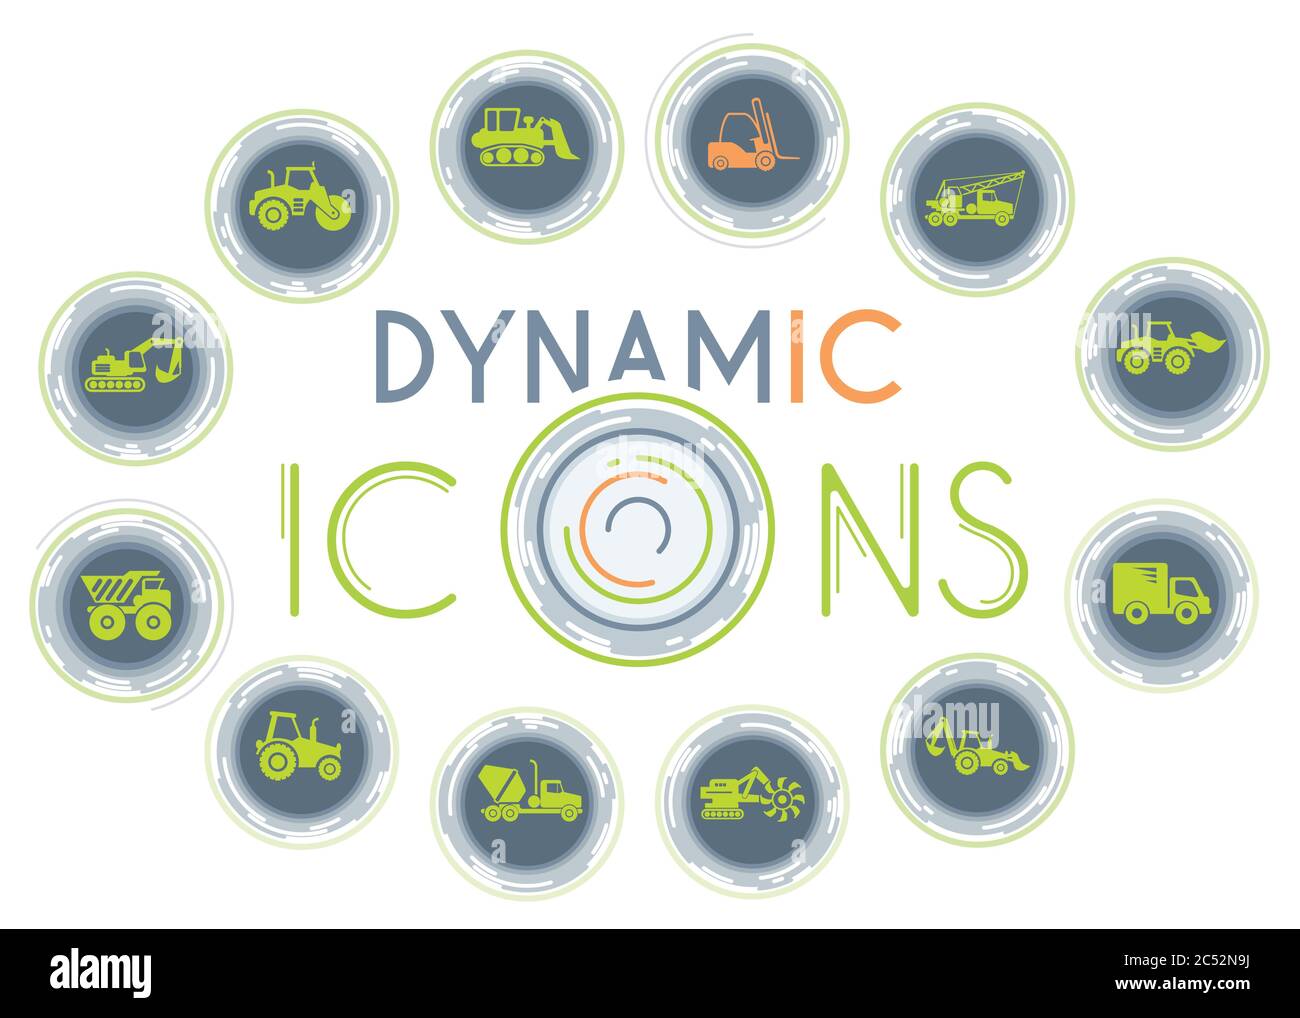 Construction Machines dynamic icons Stock Vector